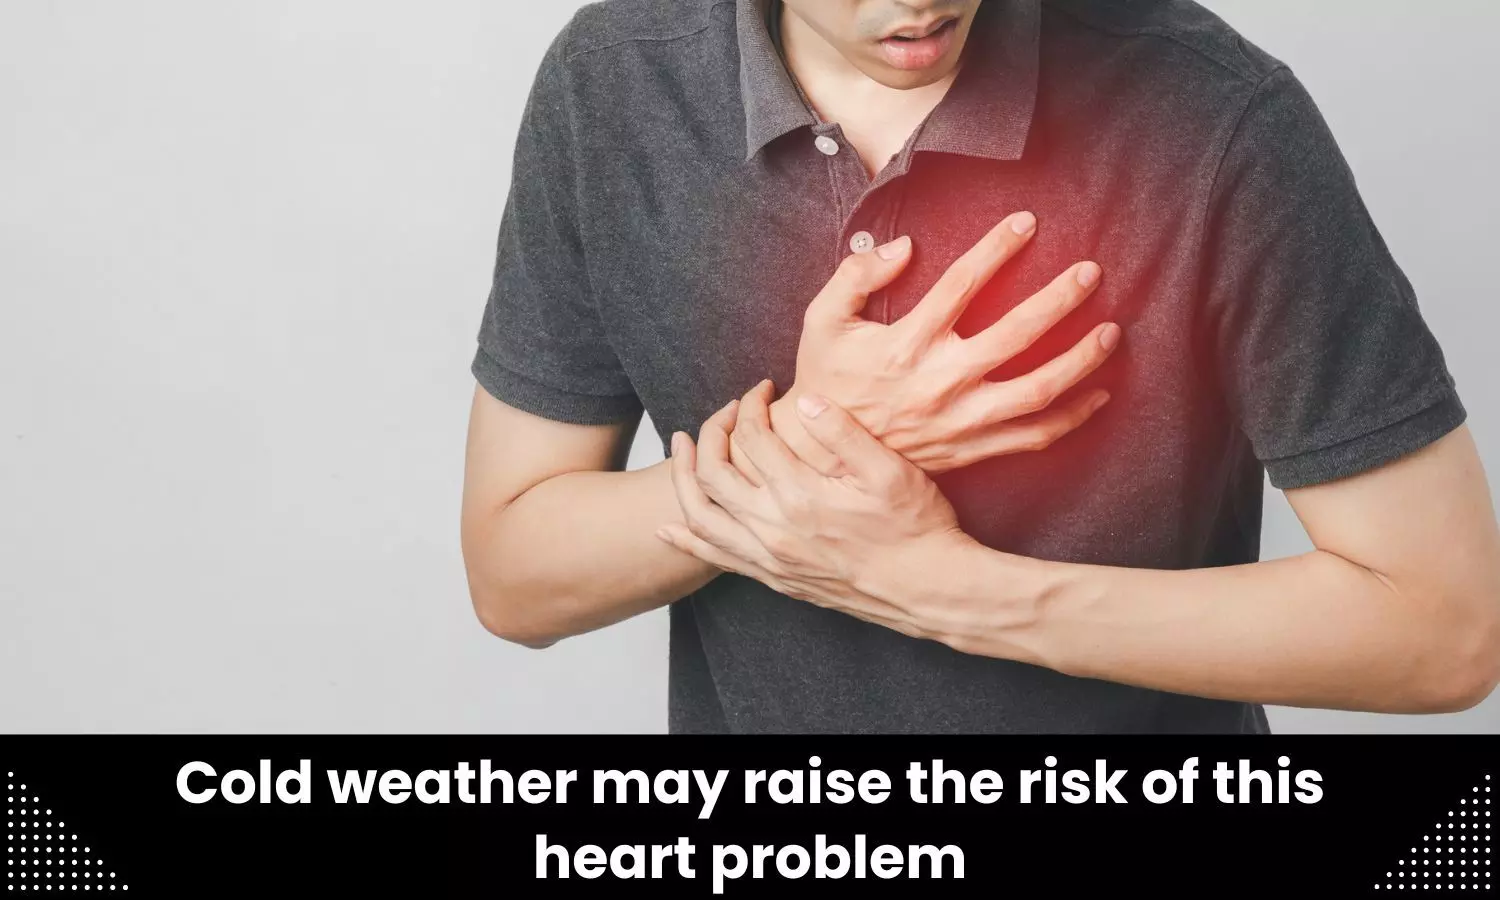 Cold weather may raise risk of heart problems: Researchers